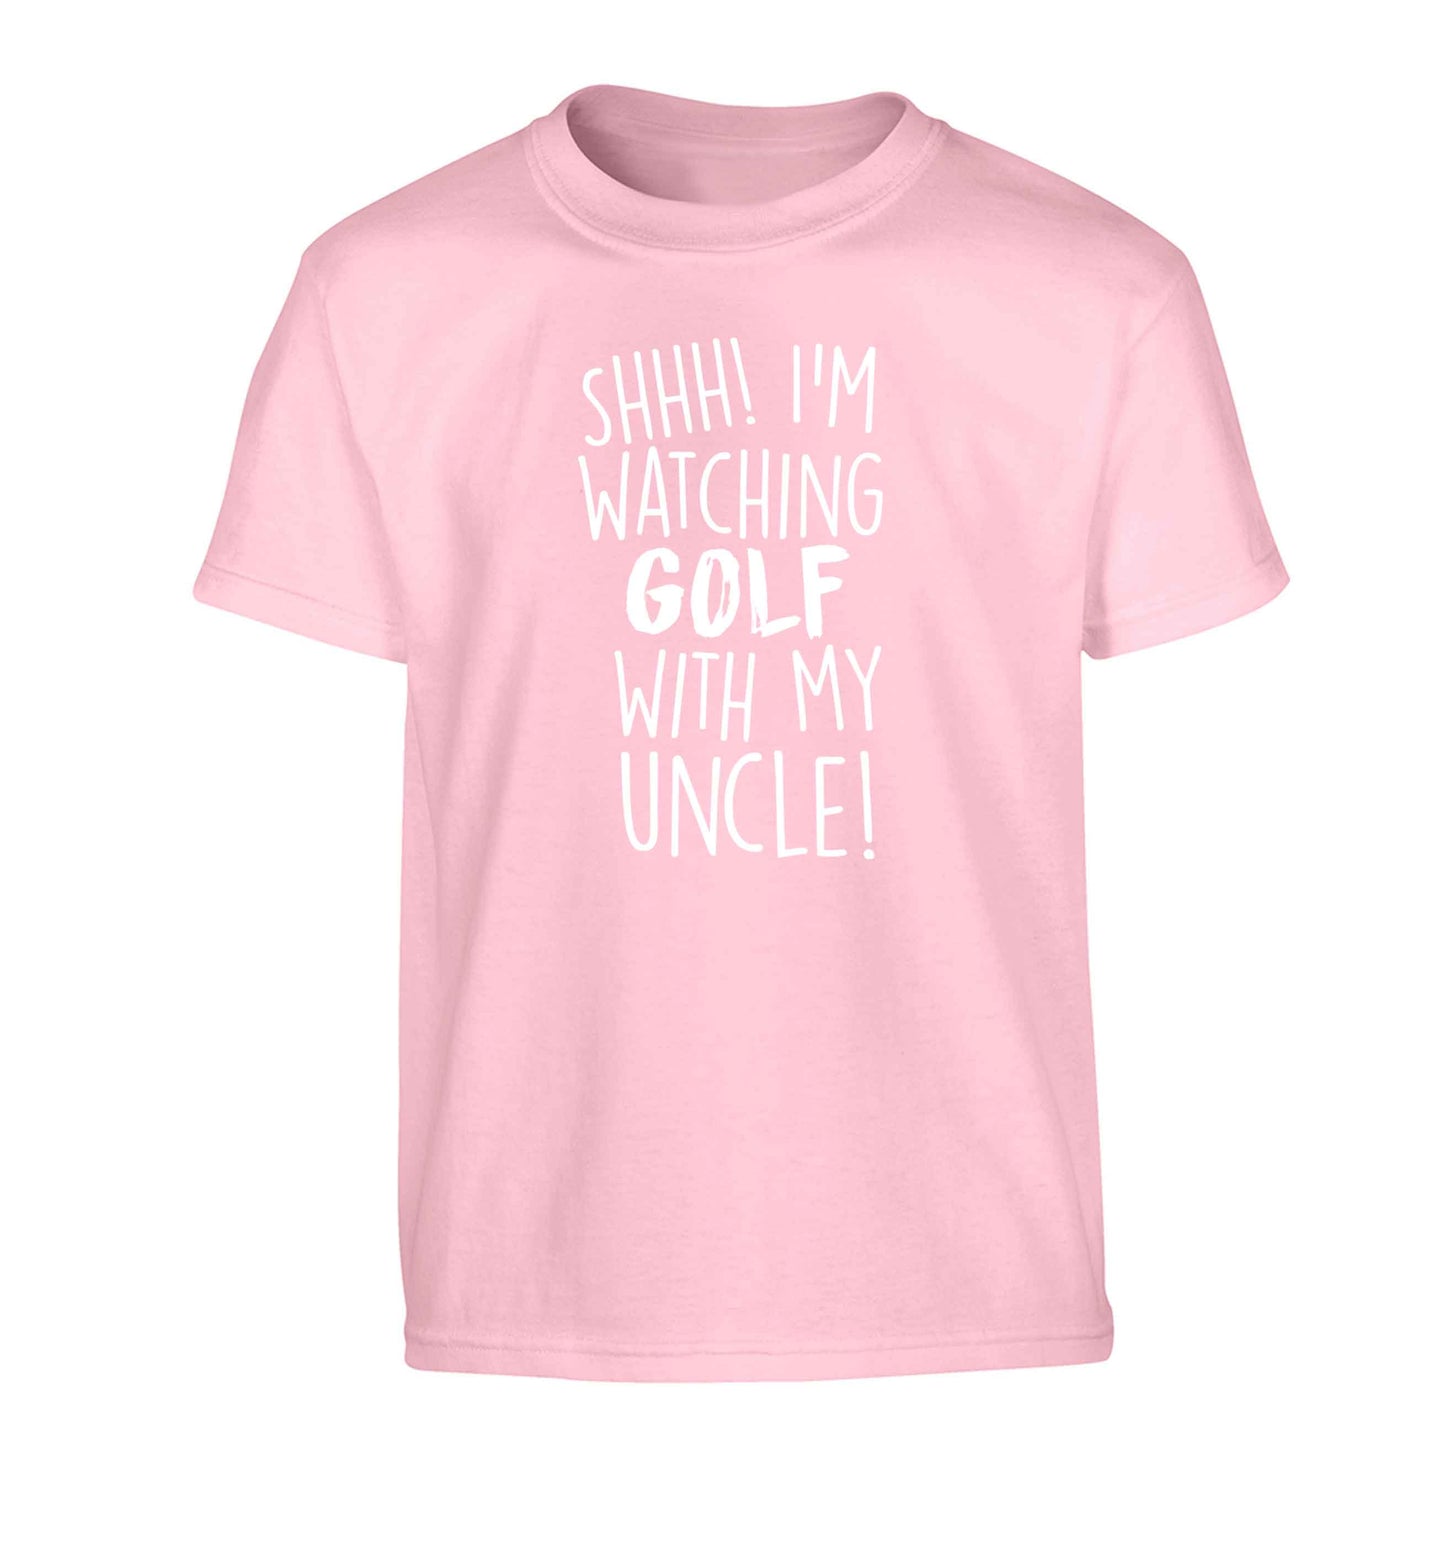 Shh I'm watching golf with my uncle Children's light pink Tshirt 12-13 Years